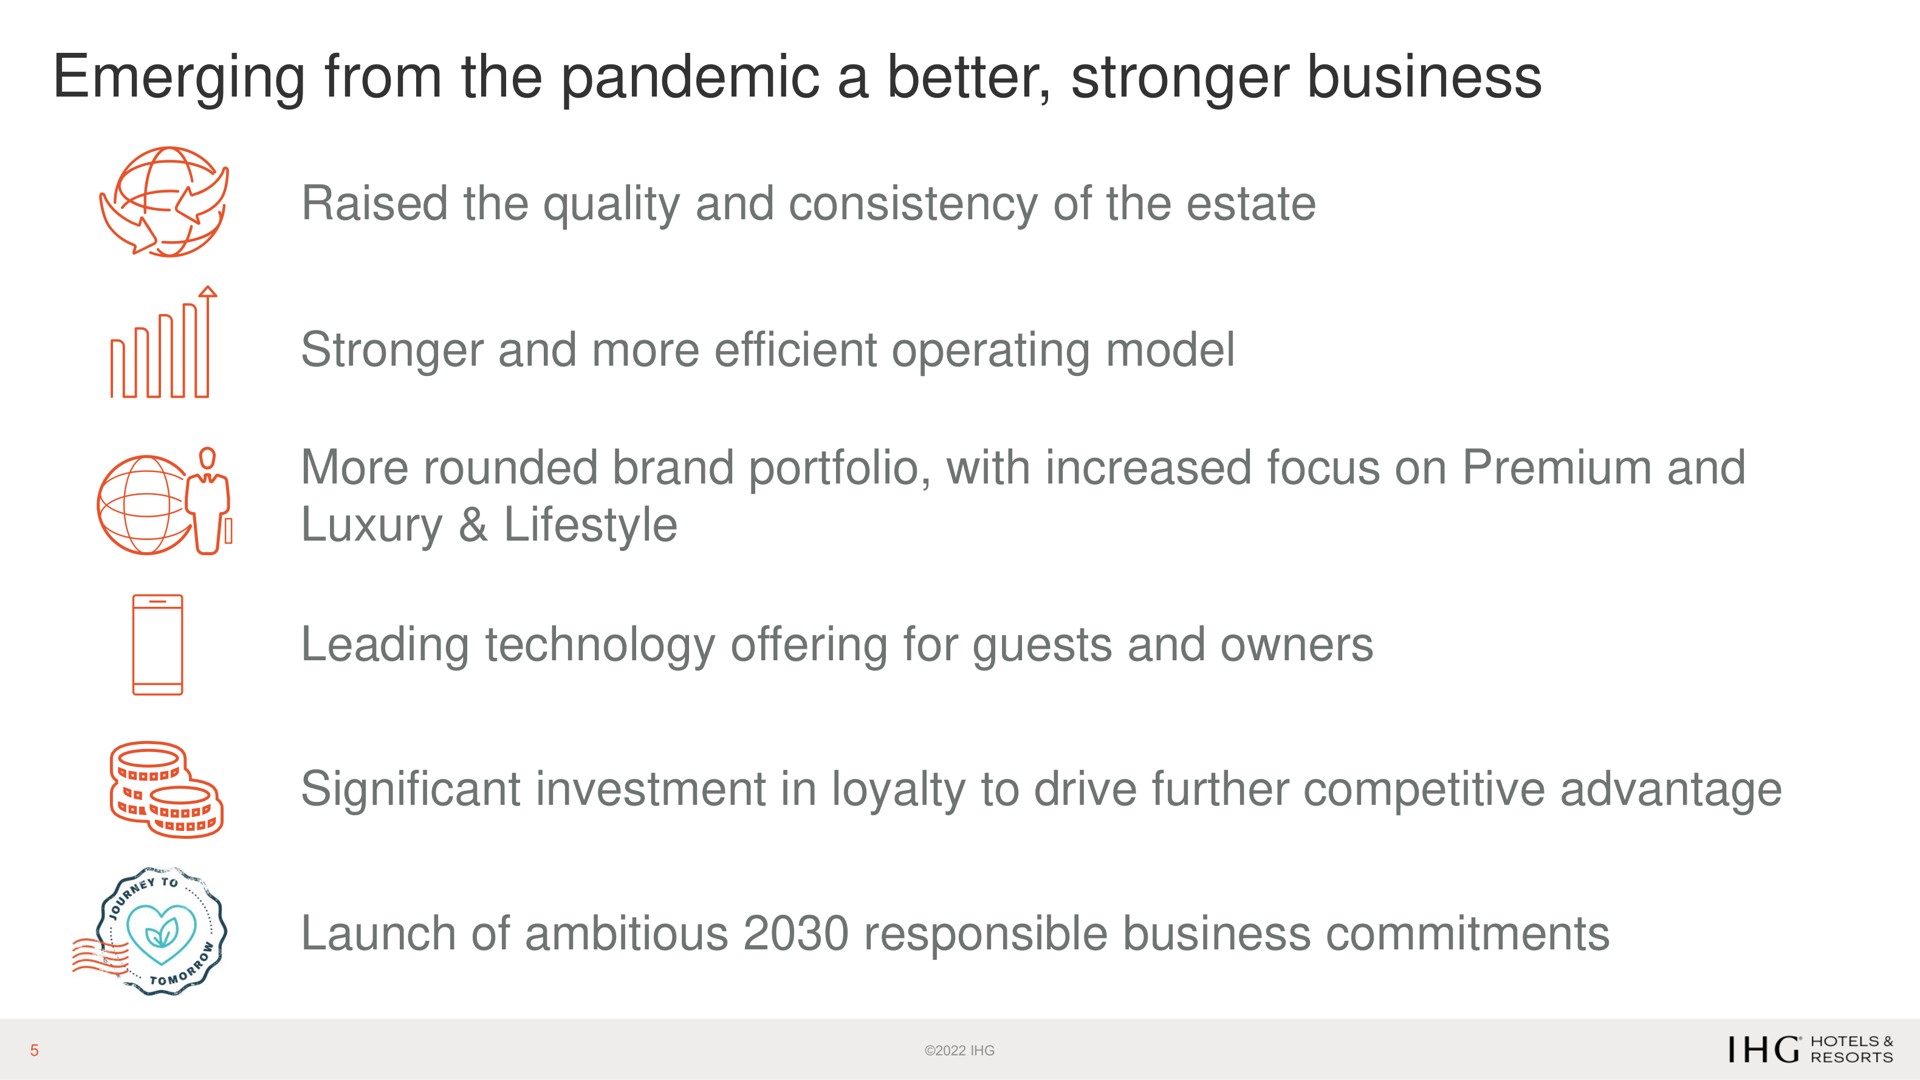 emerging from the pandemic a better business | IHG Hotels